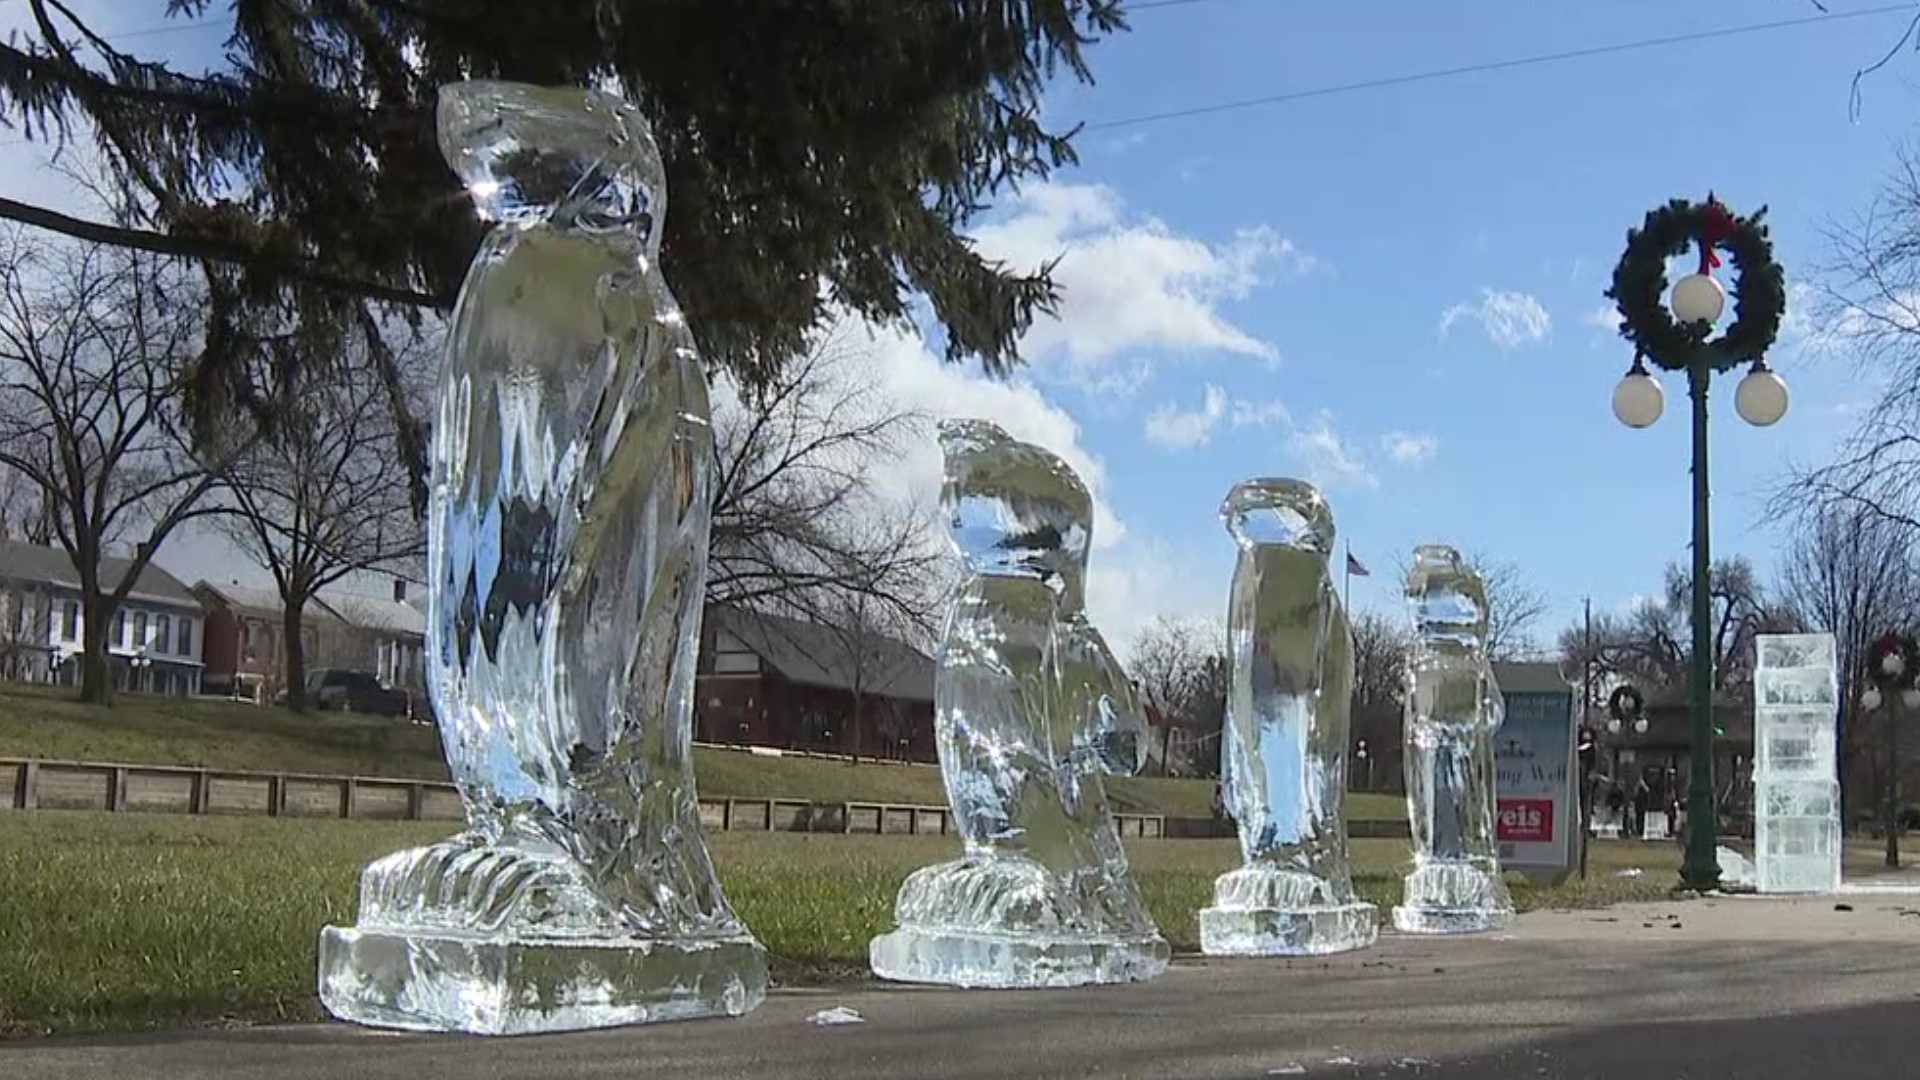 Union County is celebrating winter with its Heart of Lewisburg Ice Festival this weekend.